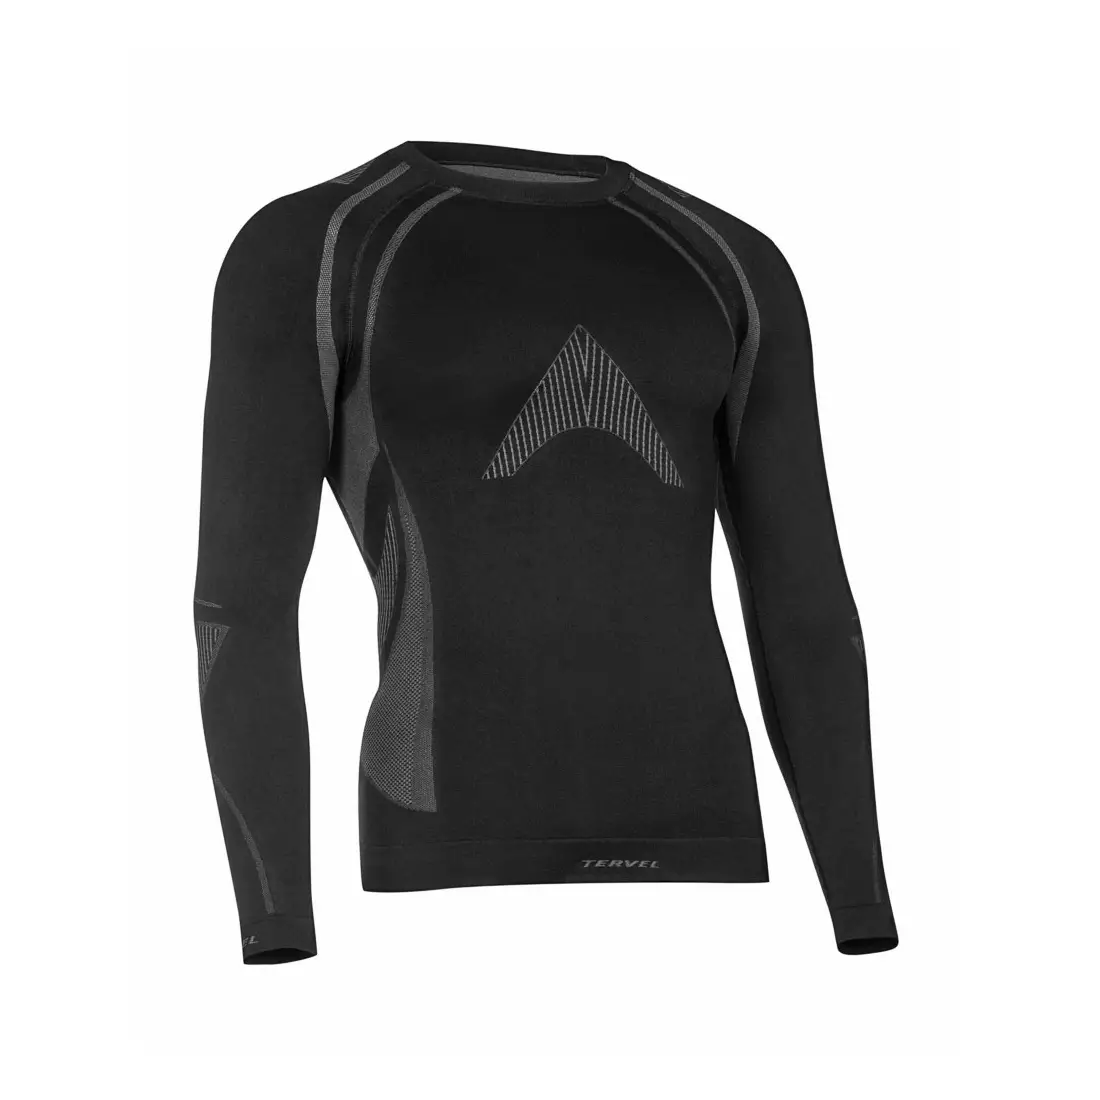 TERVEL - OPTILINE MOD-02 - men's thermal T-shirt with long sleeves, color: Black and gray